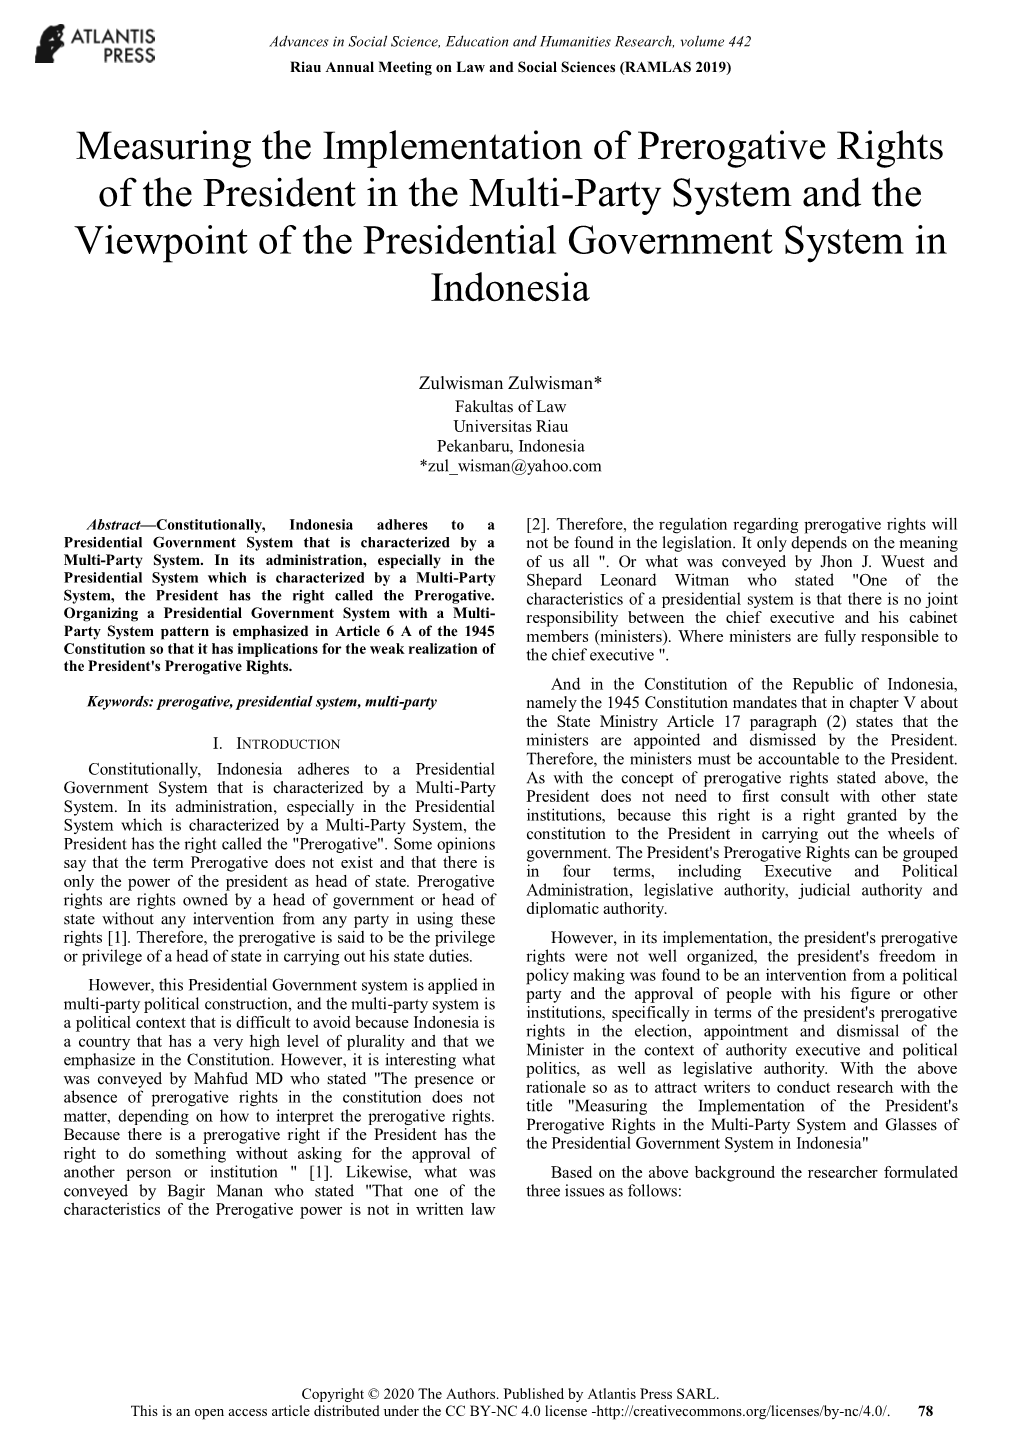 Measuring the Implementation of Prerogative Rights of the President in the Multi-Party System and the Viewpoint of the Presidential Government System in Indonesia